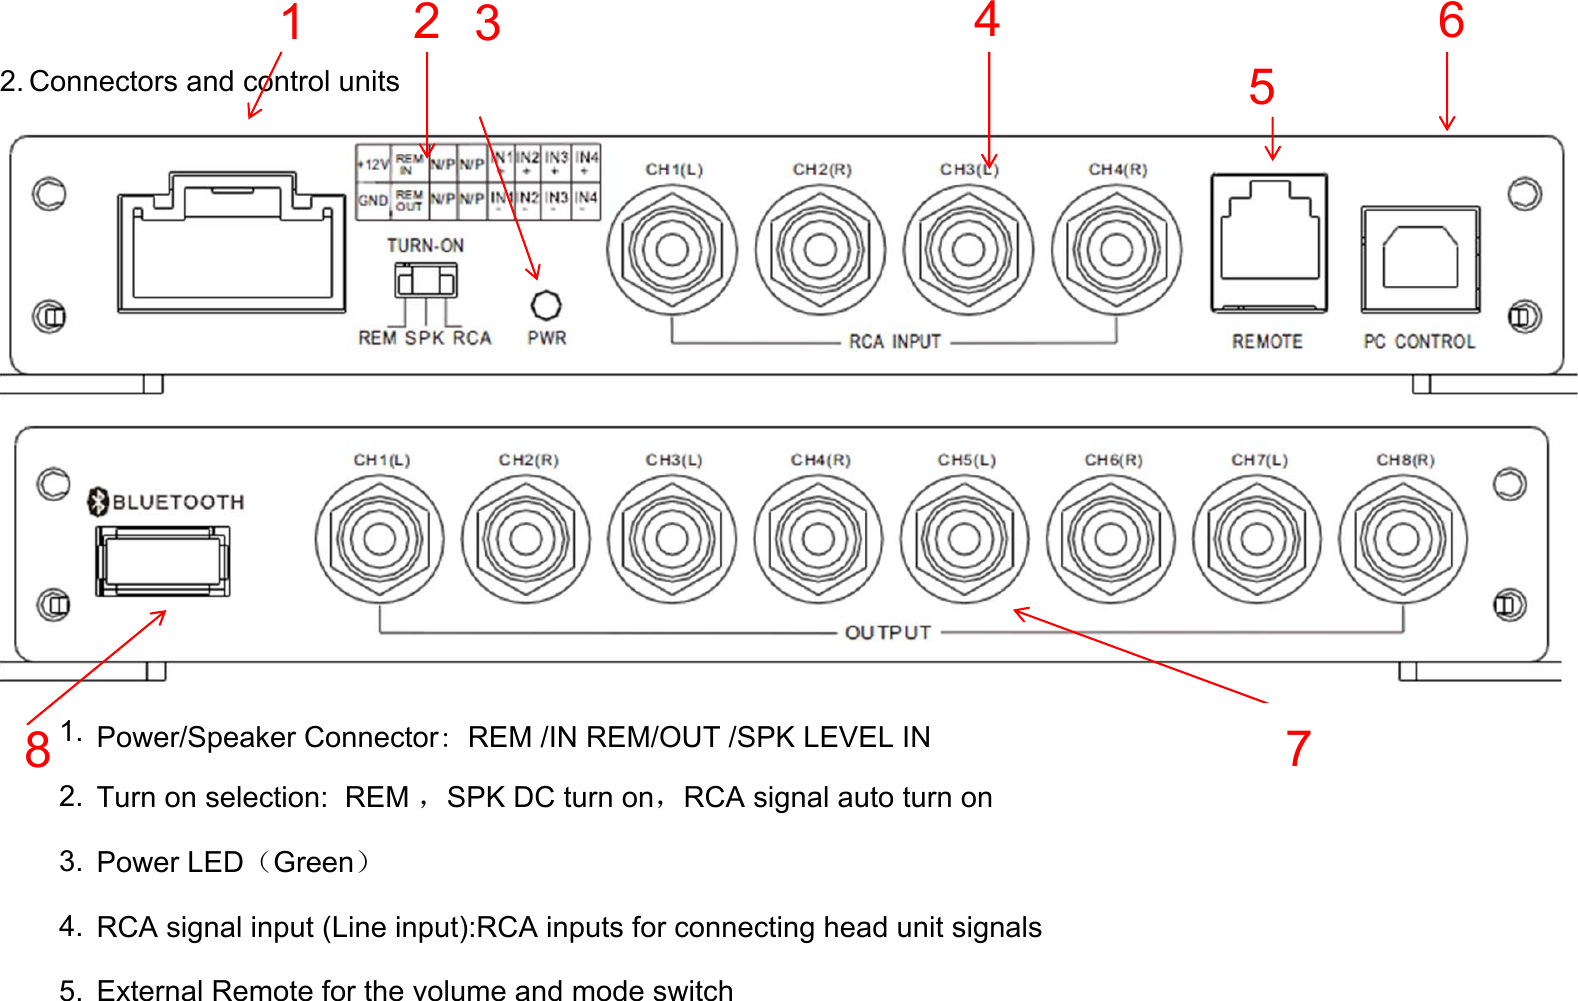 12 34456 8 2. Connectors and control units1. Power/Speaker Connector: REM /IN REM/OUT /SPK LEVEL IN2. Turn on selection:  REM ，SPK DC turn on，RCA signal auto turn on3. Power LED（Green）4. RCA signal input (Line input):RCA inputs for connecting head unit signals5. External Remote for the volume and mode switch7